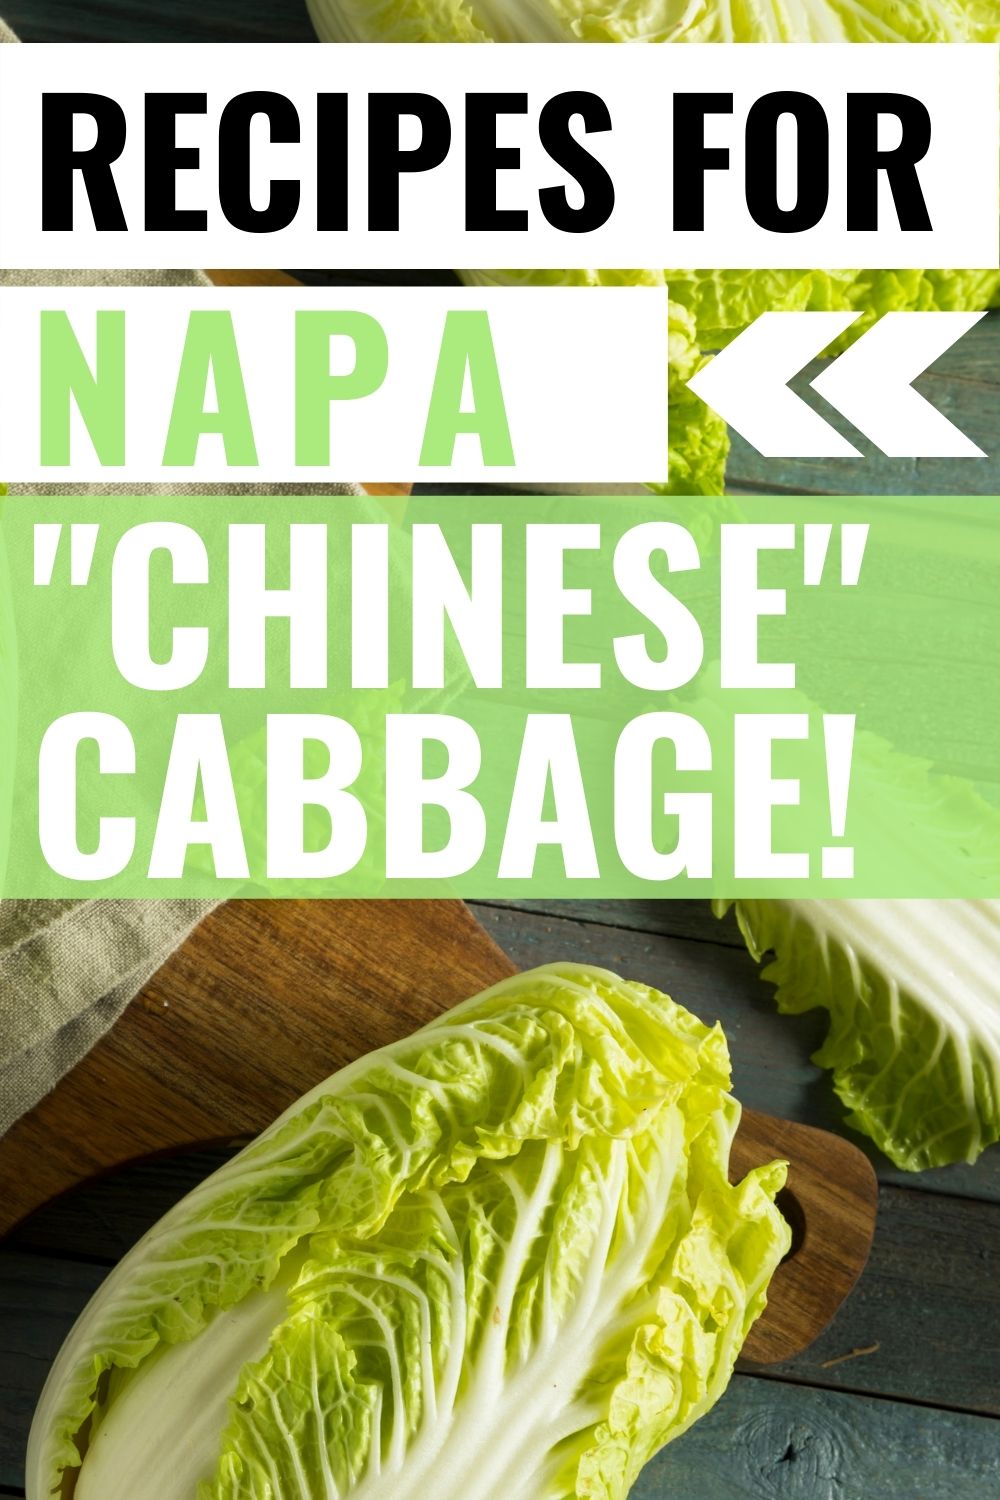 Incorporating recipes for Napa cabbage in your meal plans is a good way of adding fiber and vitamins to your eating plan as well as trying some fun new dishes!